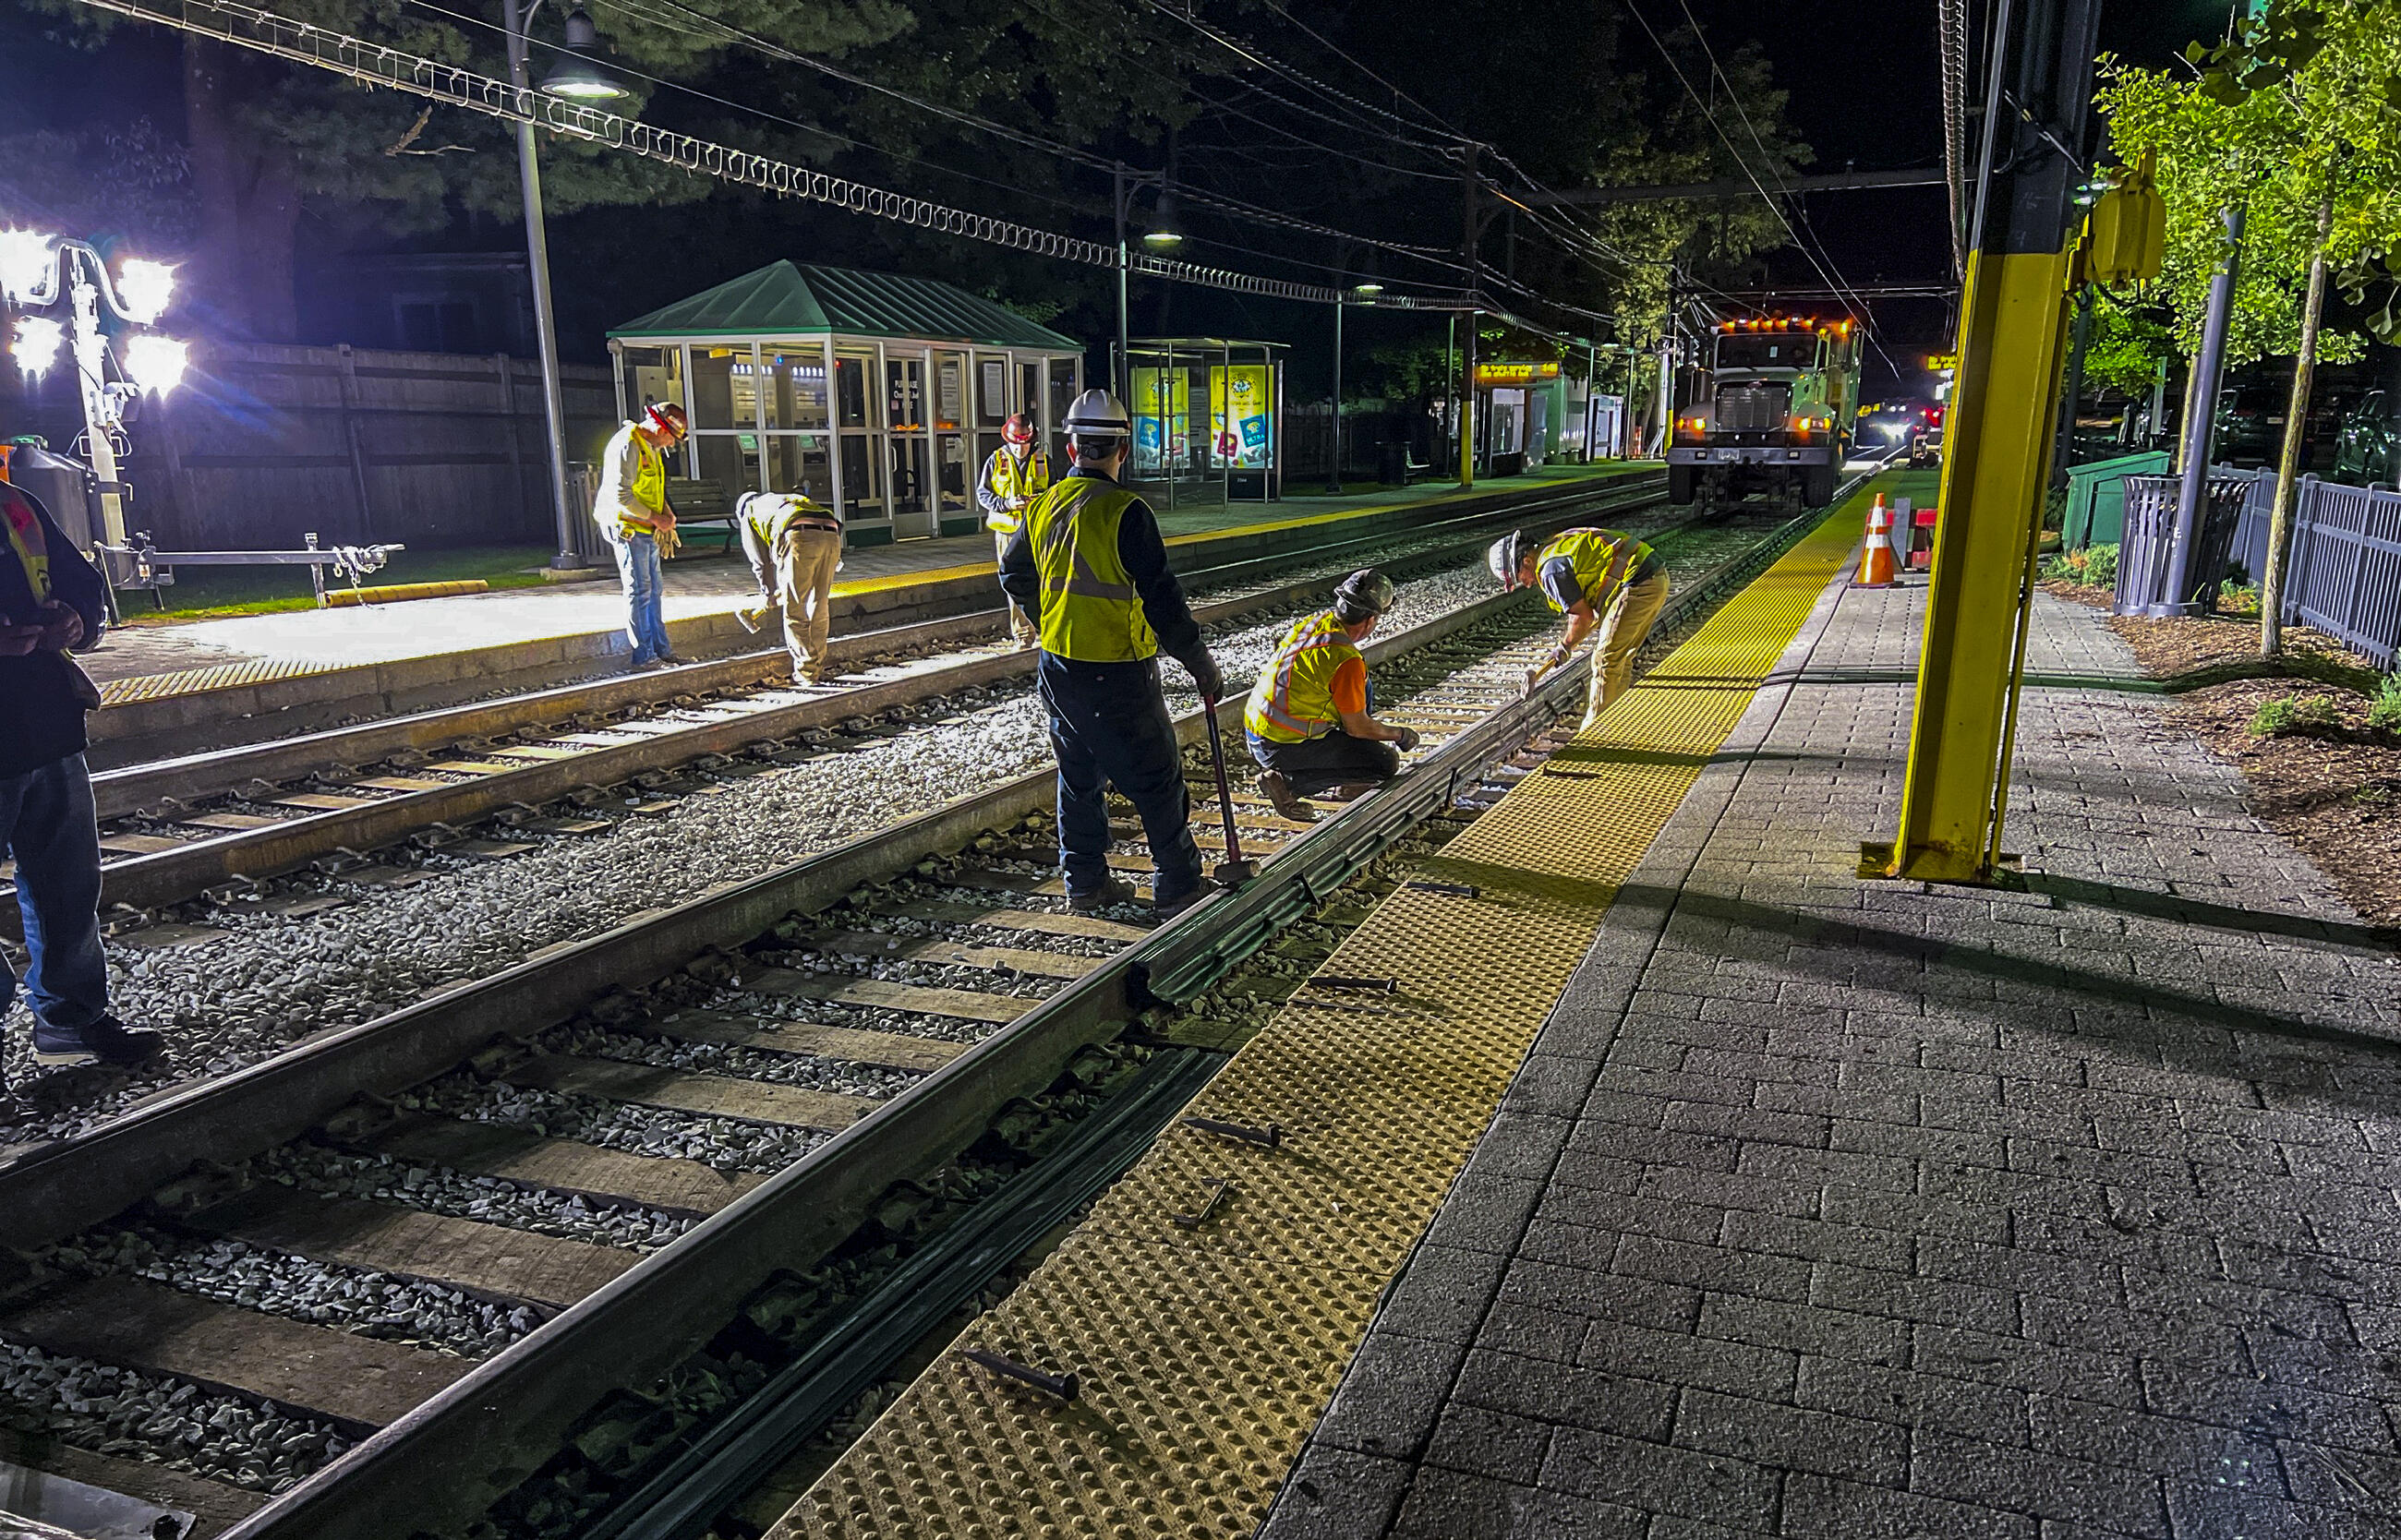 crews working on the d branch under floodlights at night